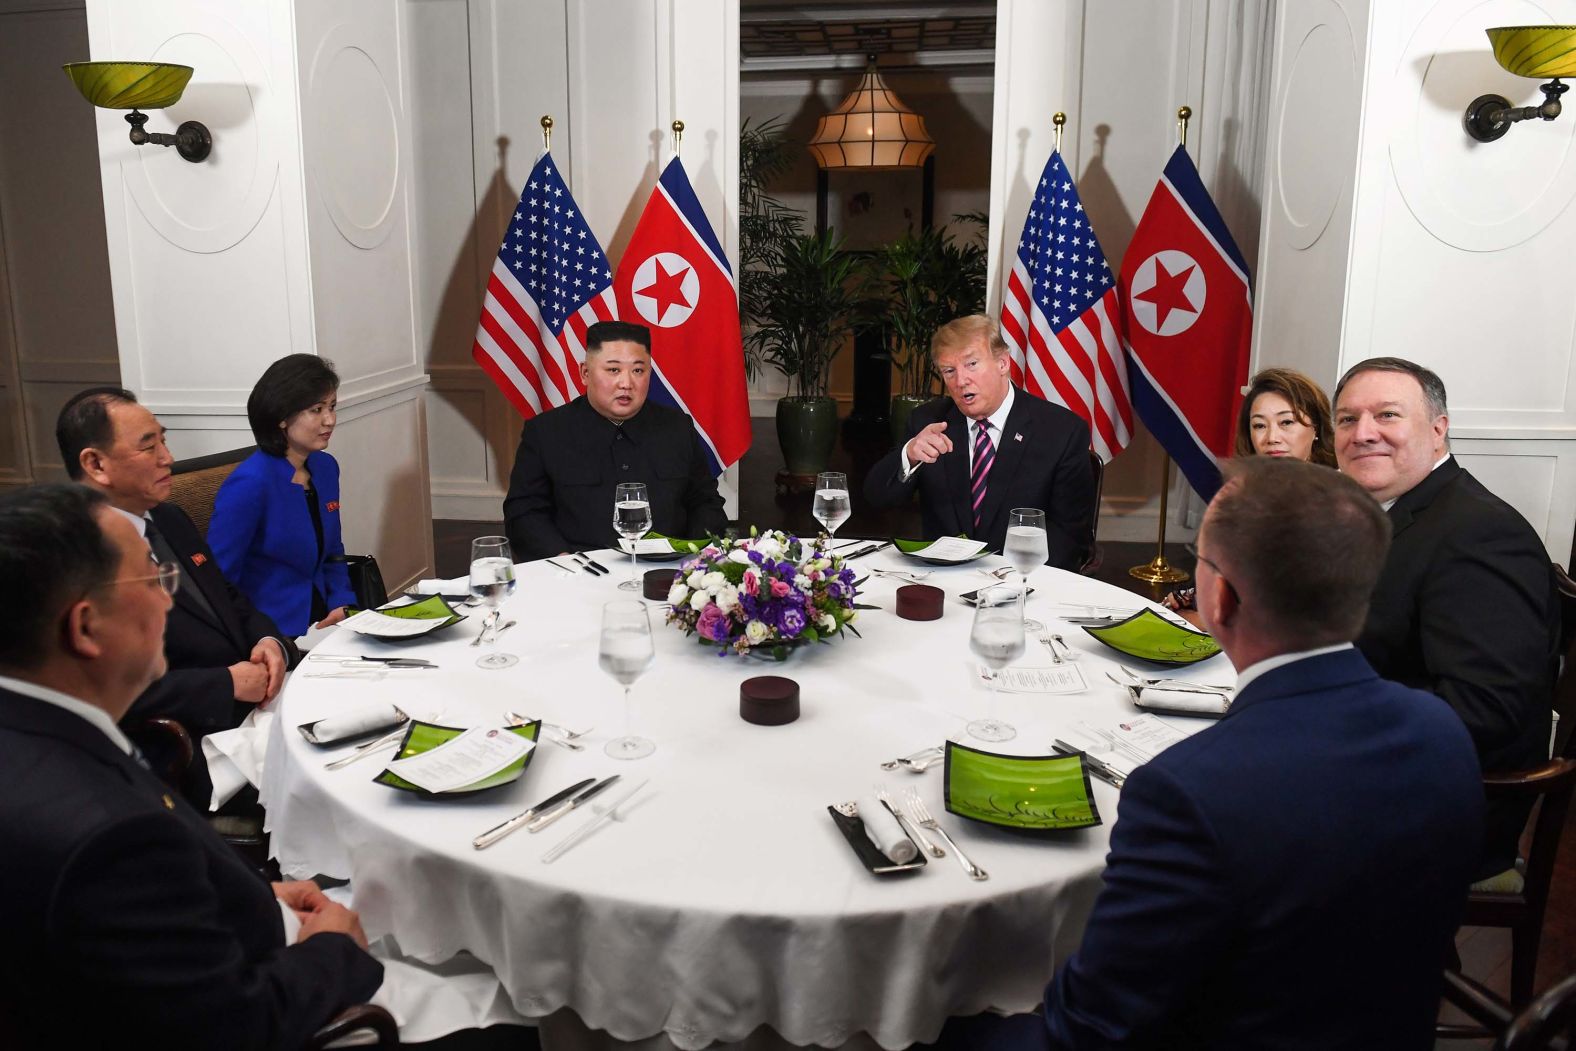 The two leaders sit for dinner at the Hotel Metropole Hanoi on February 27. The men were <a href="index.php?page=&url=https%3A%2F%2Fwww.cnn.com%2Fpolitics%2Flive-news%2Ftrump-kim-jong-un-summit-vietnam-february-2019%2Fh_16c6aa1733e76d22621034004ef4acd0" target="_blank">joined by interpreters and a few associates,</a> including US Secretary of State Mike Pompeo, far right. "Nothing like having a nice private dinner," Trump joked as a limited pool of reporters took photos.